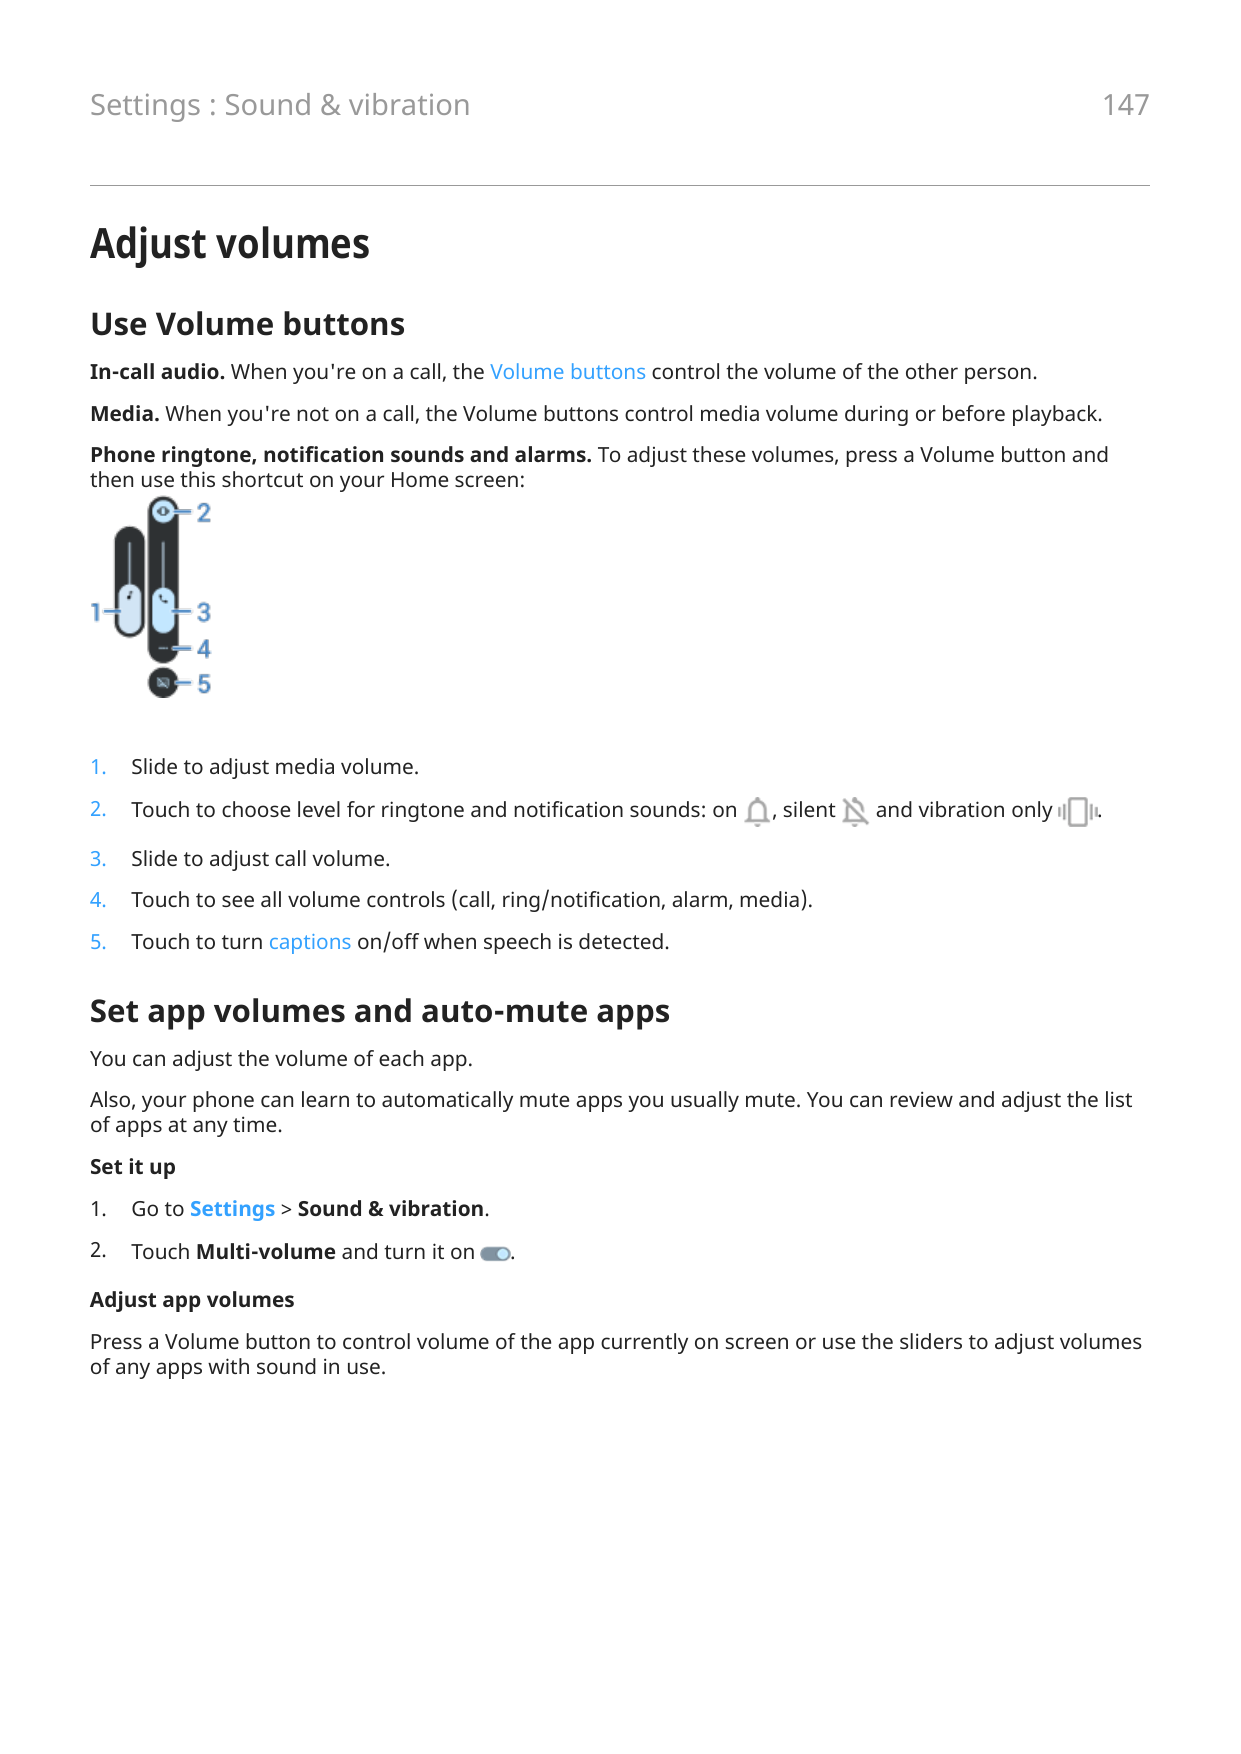 147Settings : Sound & vibrationAdjust volumesUse Volume buttonsIn-call audio. When you're on a call, the Volume buttons control 